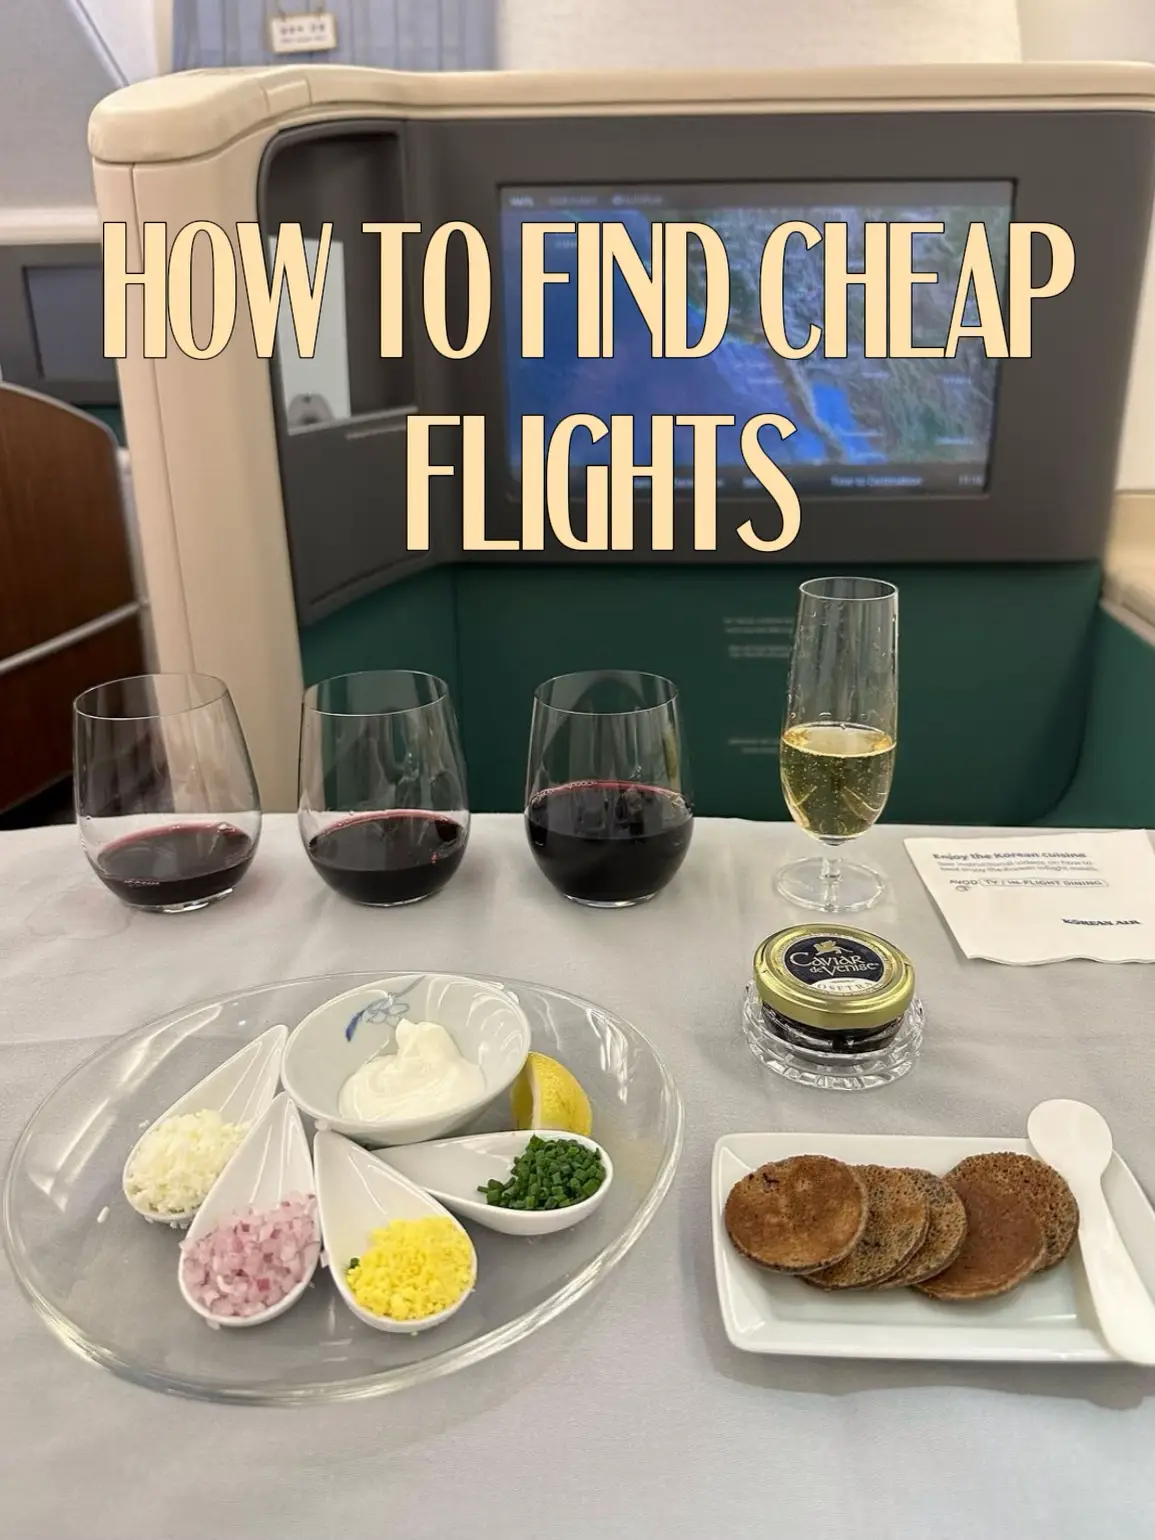 HOW TO FIND CHEAP FLIGHTS's images(0)